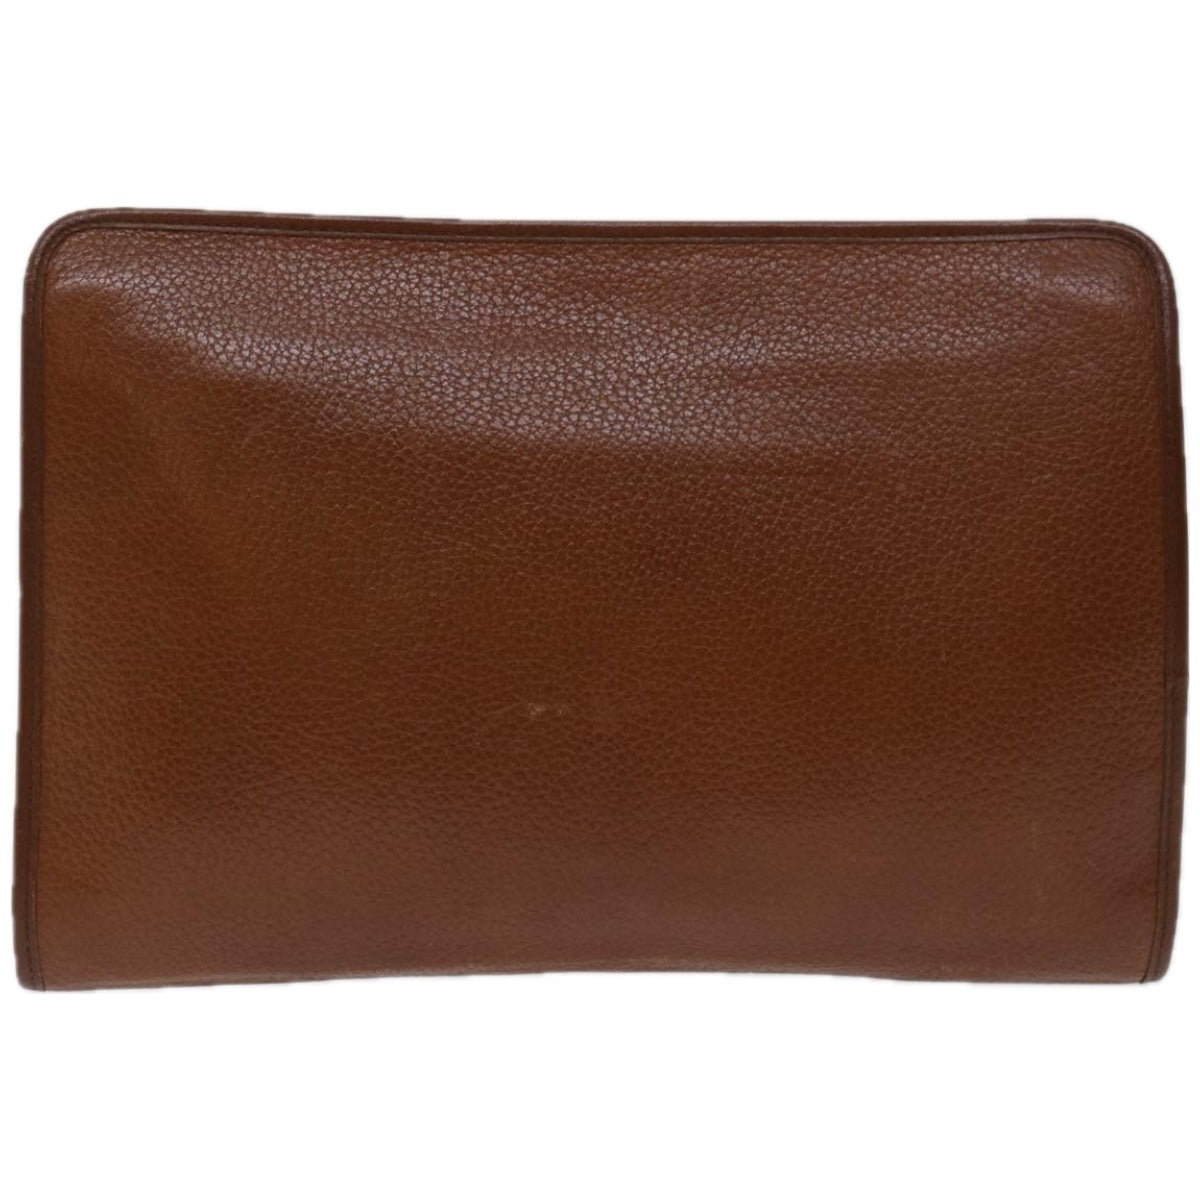 Burberrys Clutch Bag Leather Brown Auth bs12490 - 0